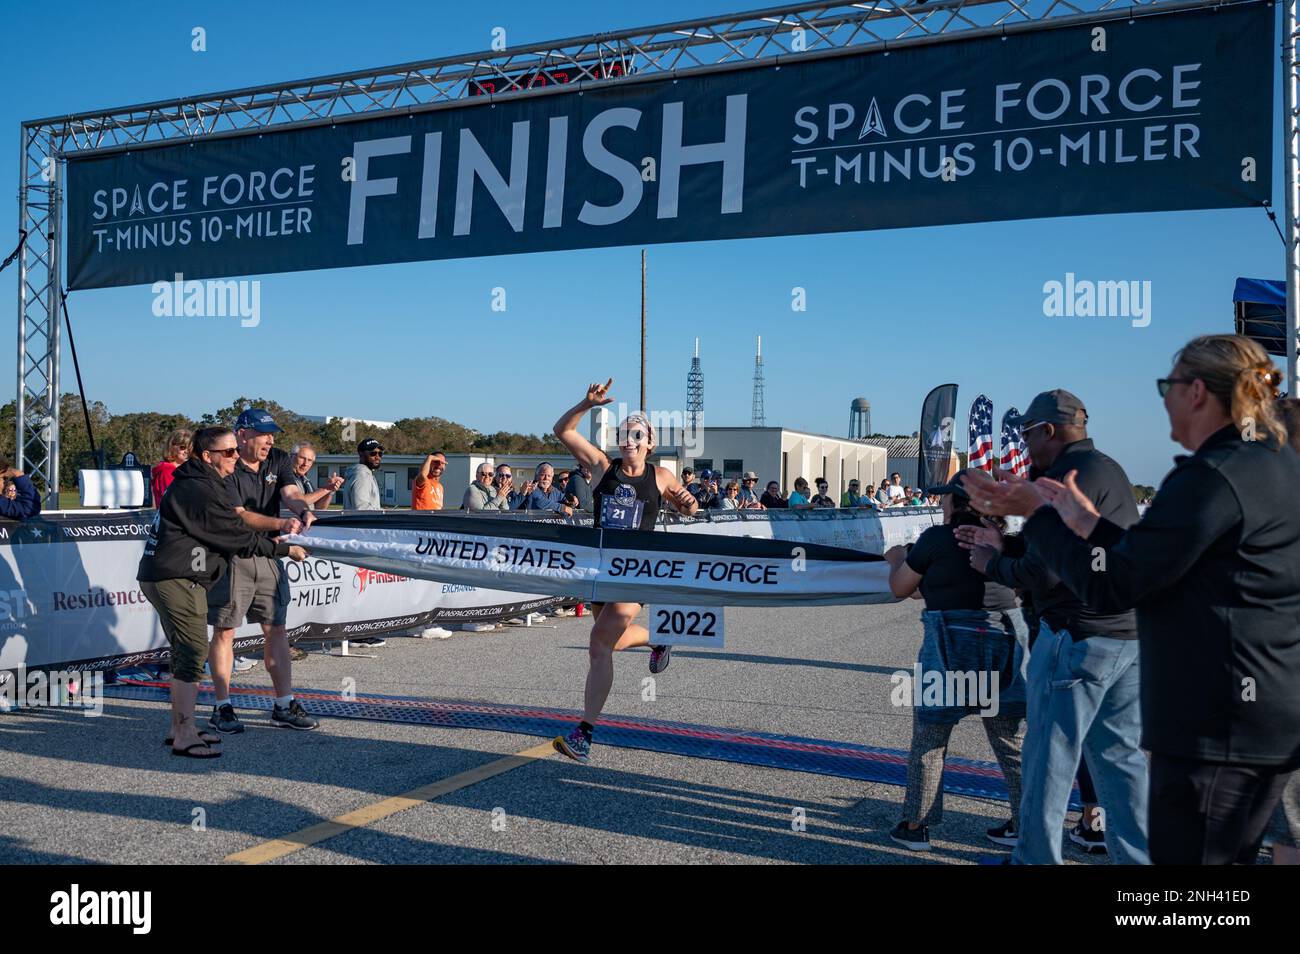 Grace Tinkey, a T-Minus 10-Miler participant from Wichita Falls, TX., runs through the finish line at Cape Canaveral Space Force Station, Fla., Dec. 10, 2022. She was the first female to finish the race with a time of 1 hour, 3 minutes, and 19 seconds. Stock Photo